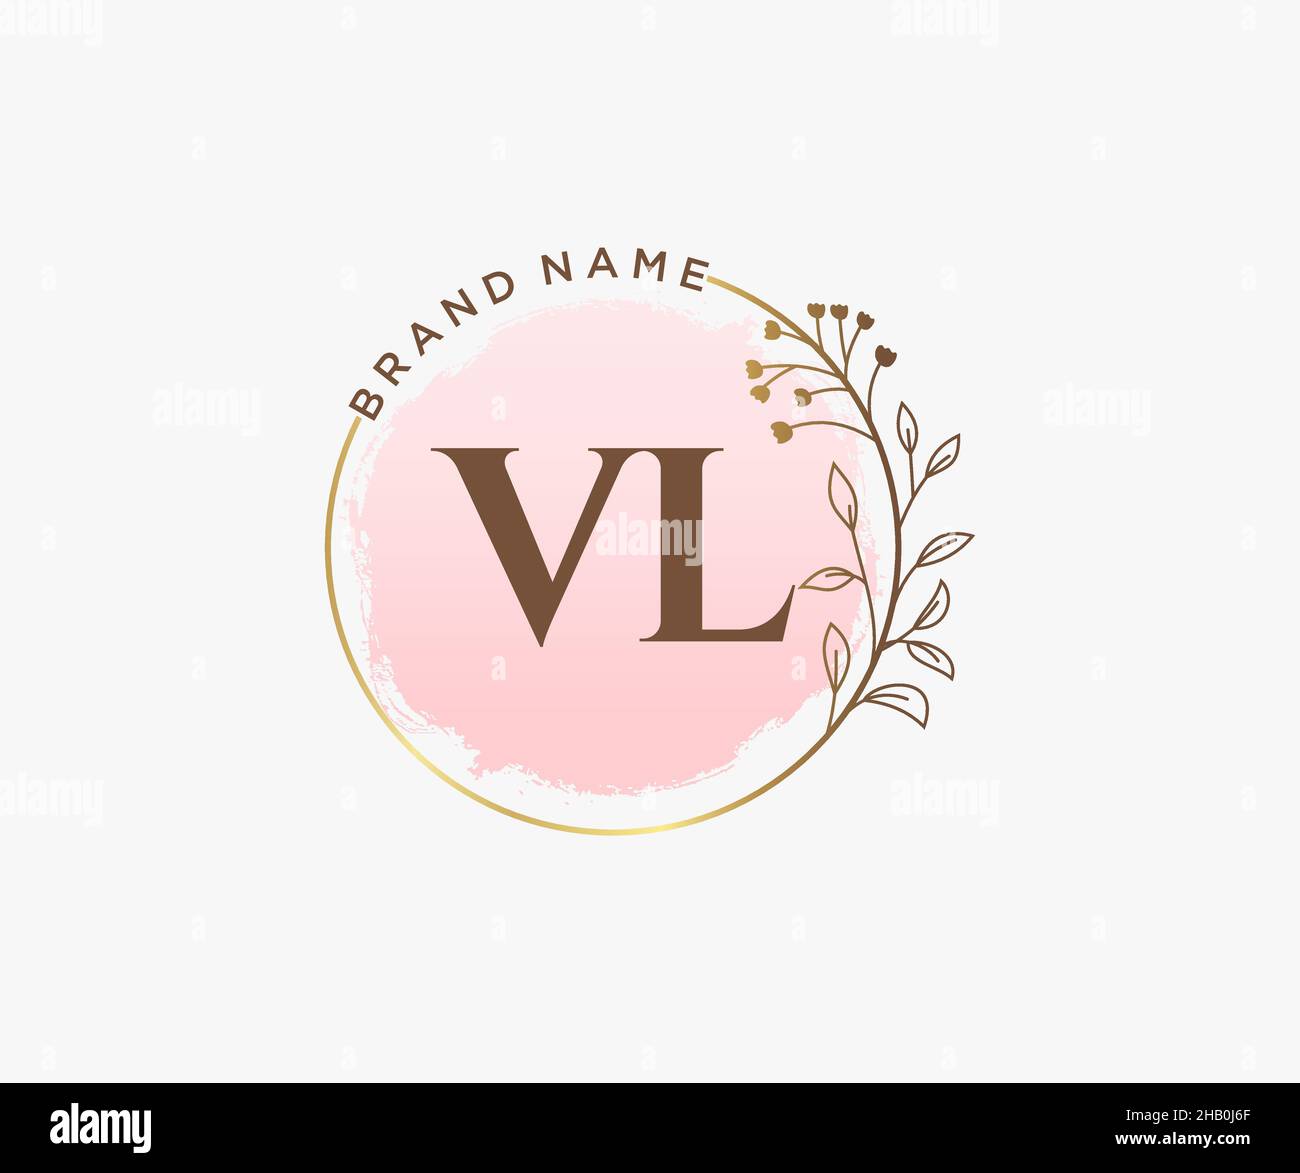 Vl logo design vector icon • wall stickers v, background, beauty